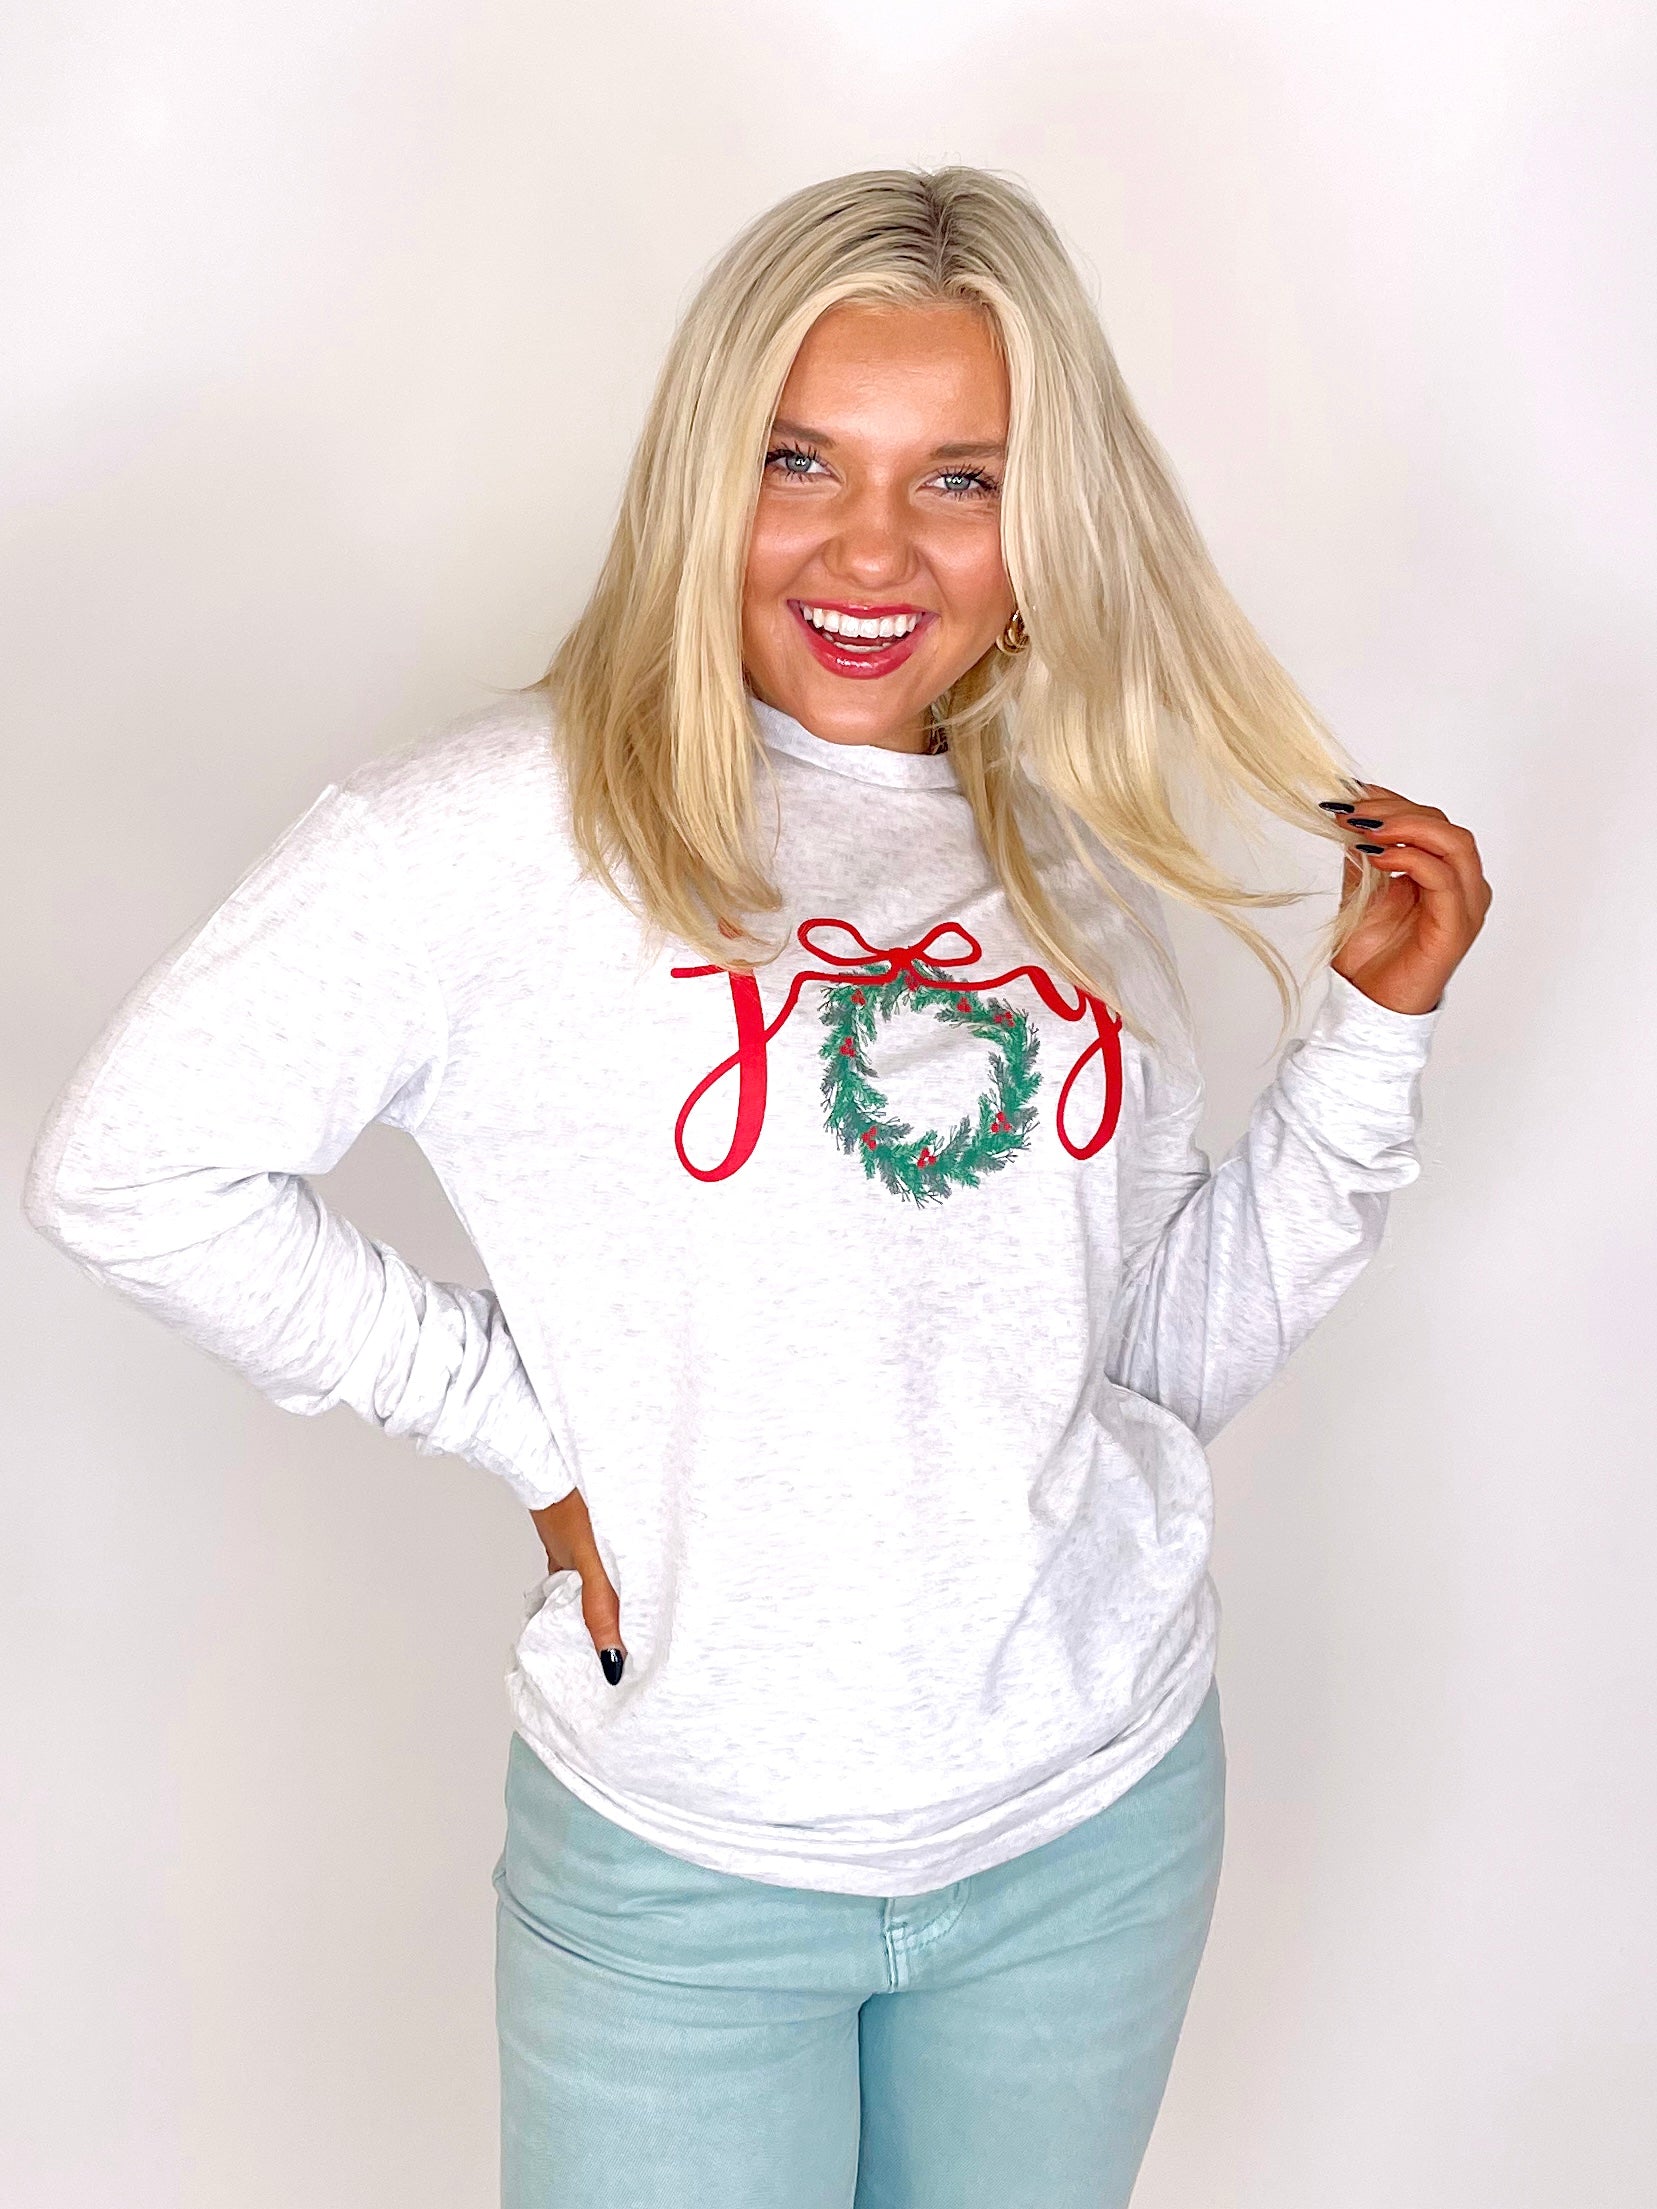 Joy to the World Long Sleeve Tee | DOORBUSTER-Long Sleeves-The Royal Standard-The Village Shoppe, Women’s Fashion Boutique, Shop Online and In Store - Located in Muscle Shoals, AL.